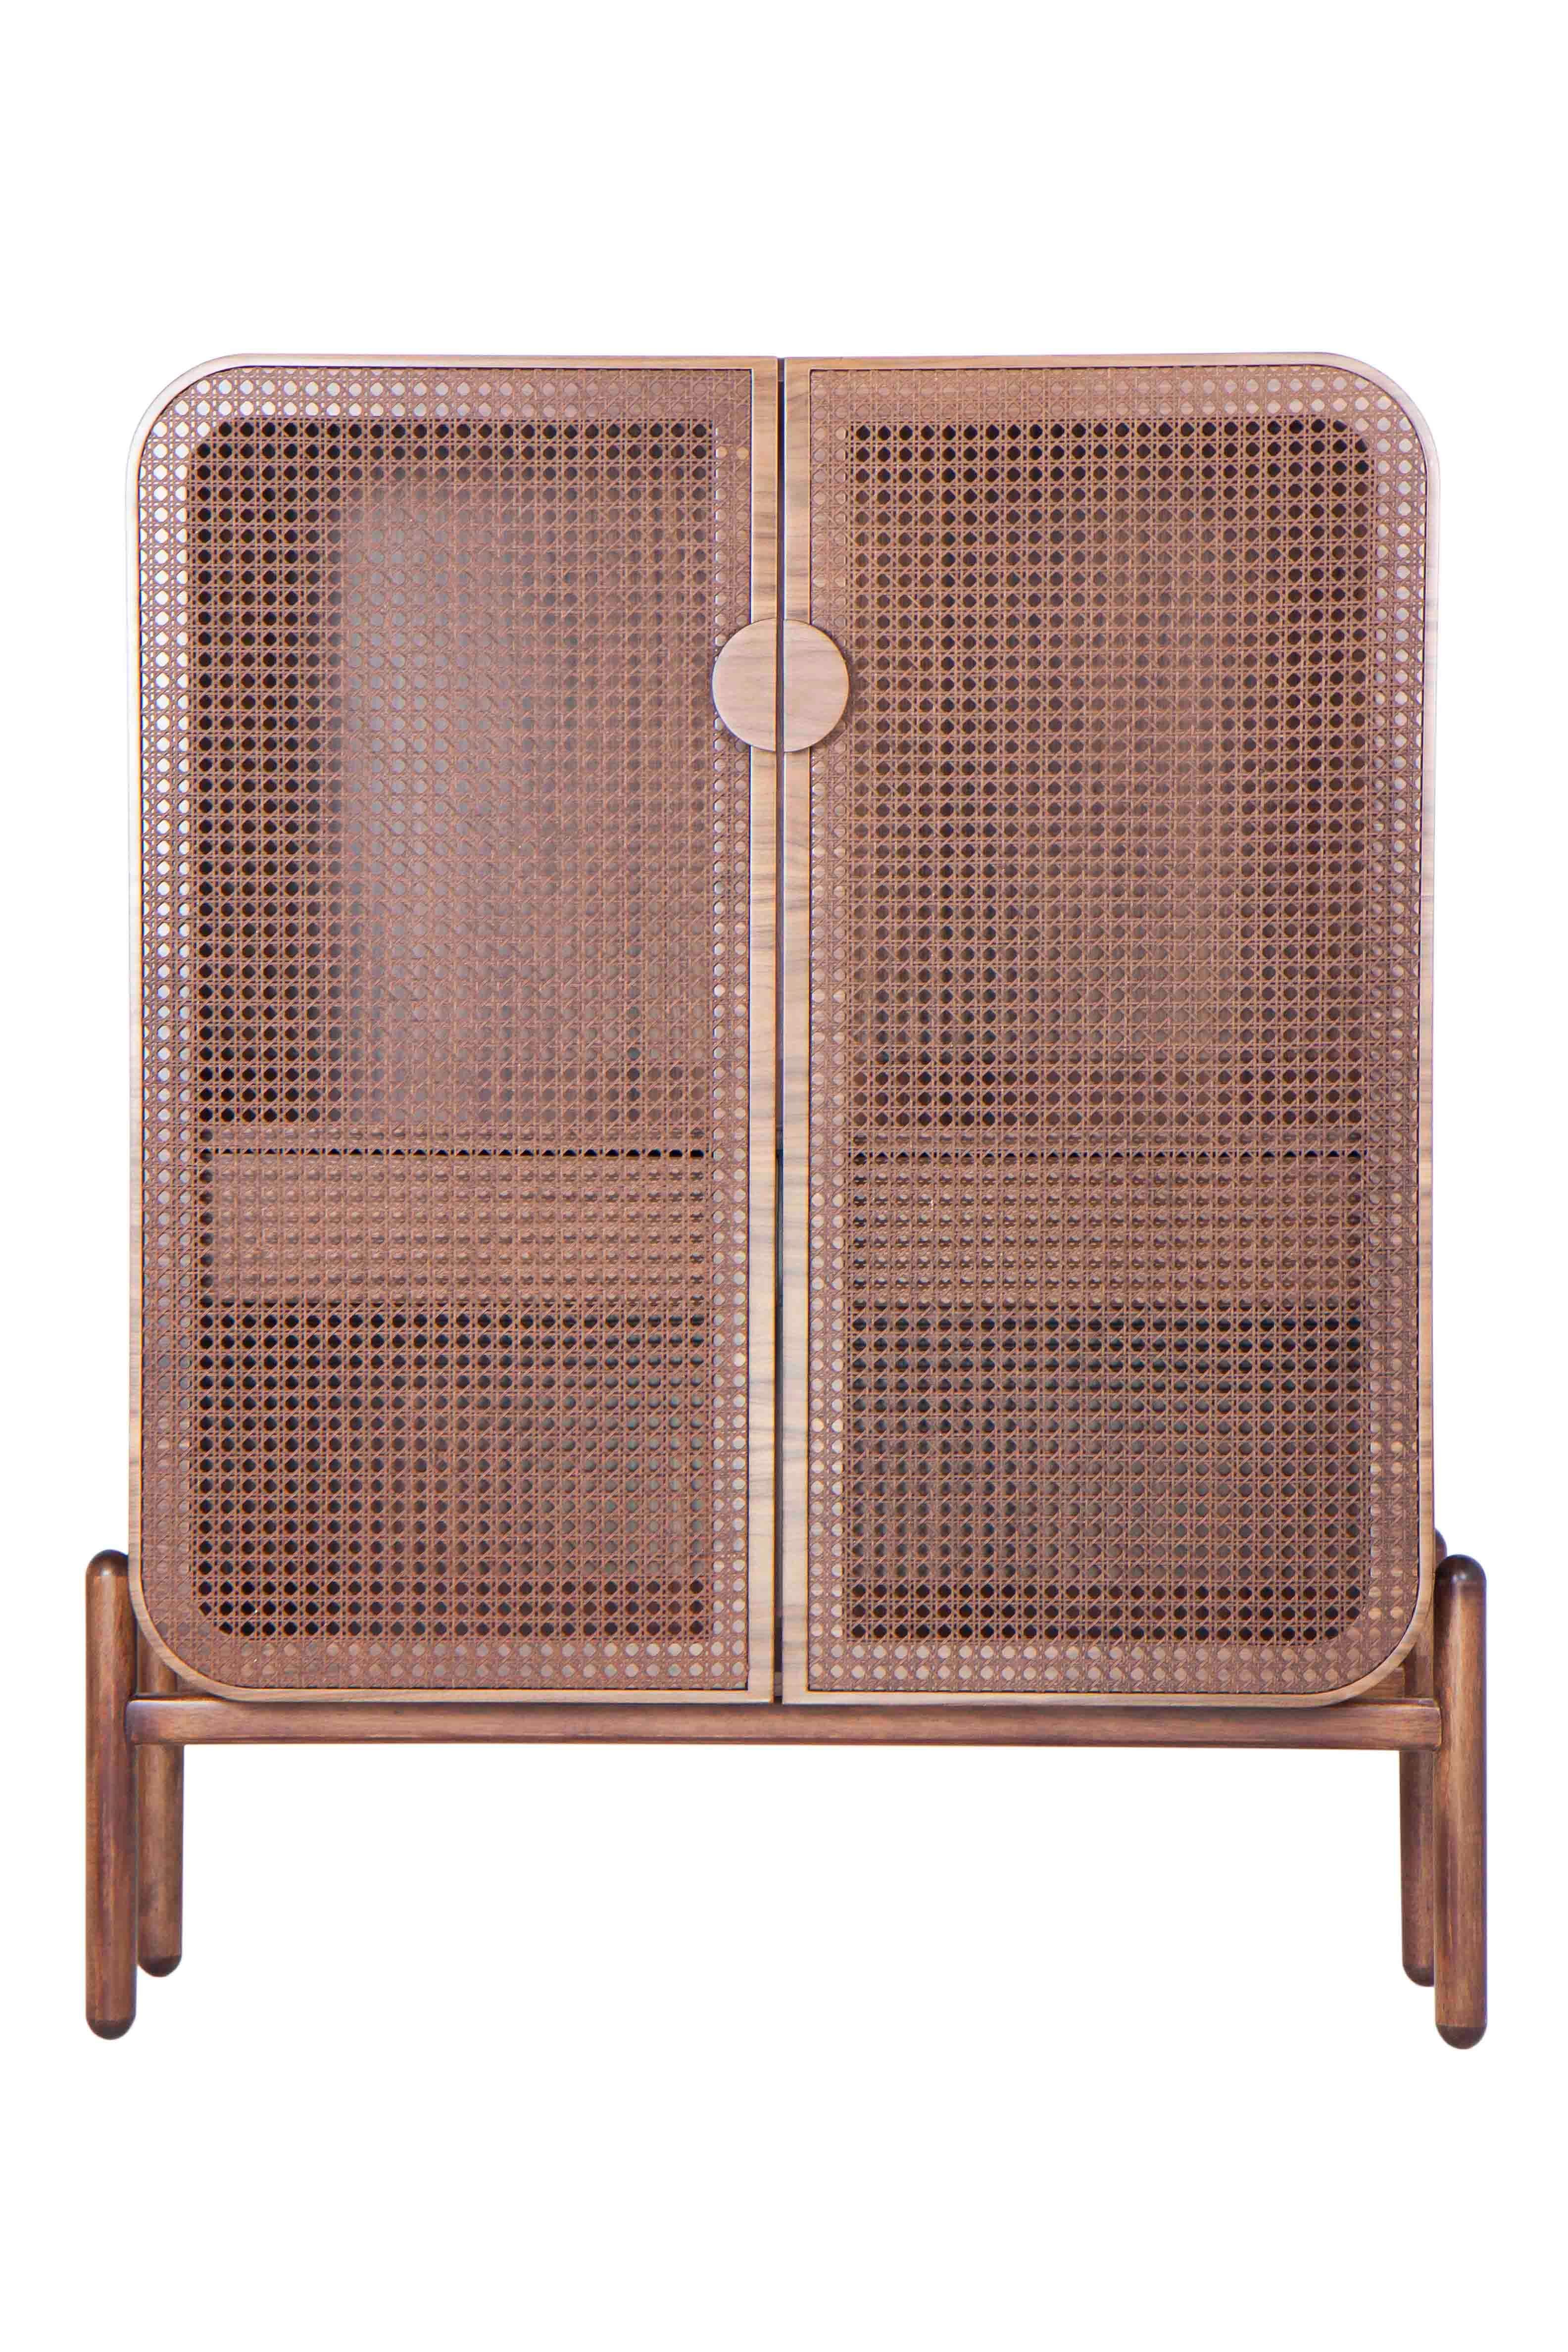 An amazing piece with a lot of space with two (2) convenient drawers inside.
Made with special attention to detail, the caned doors leave subtle transparency, bringing lightness to the piece.
Solid wood and straws/wicker (caning)
Color: